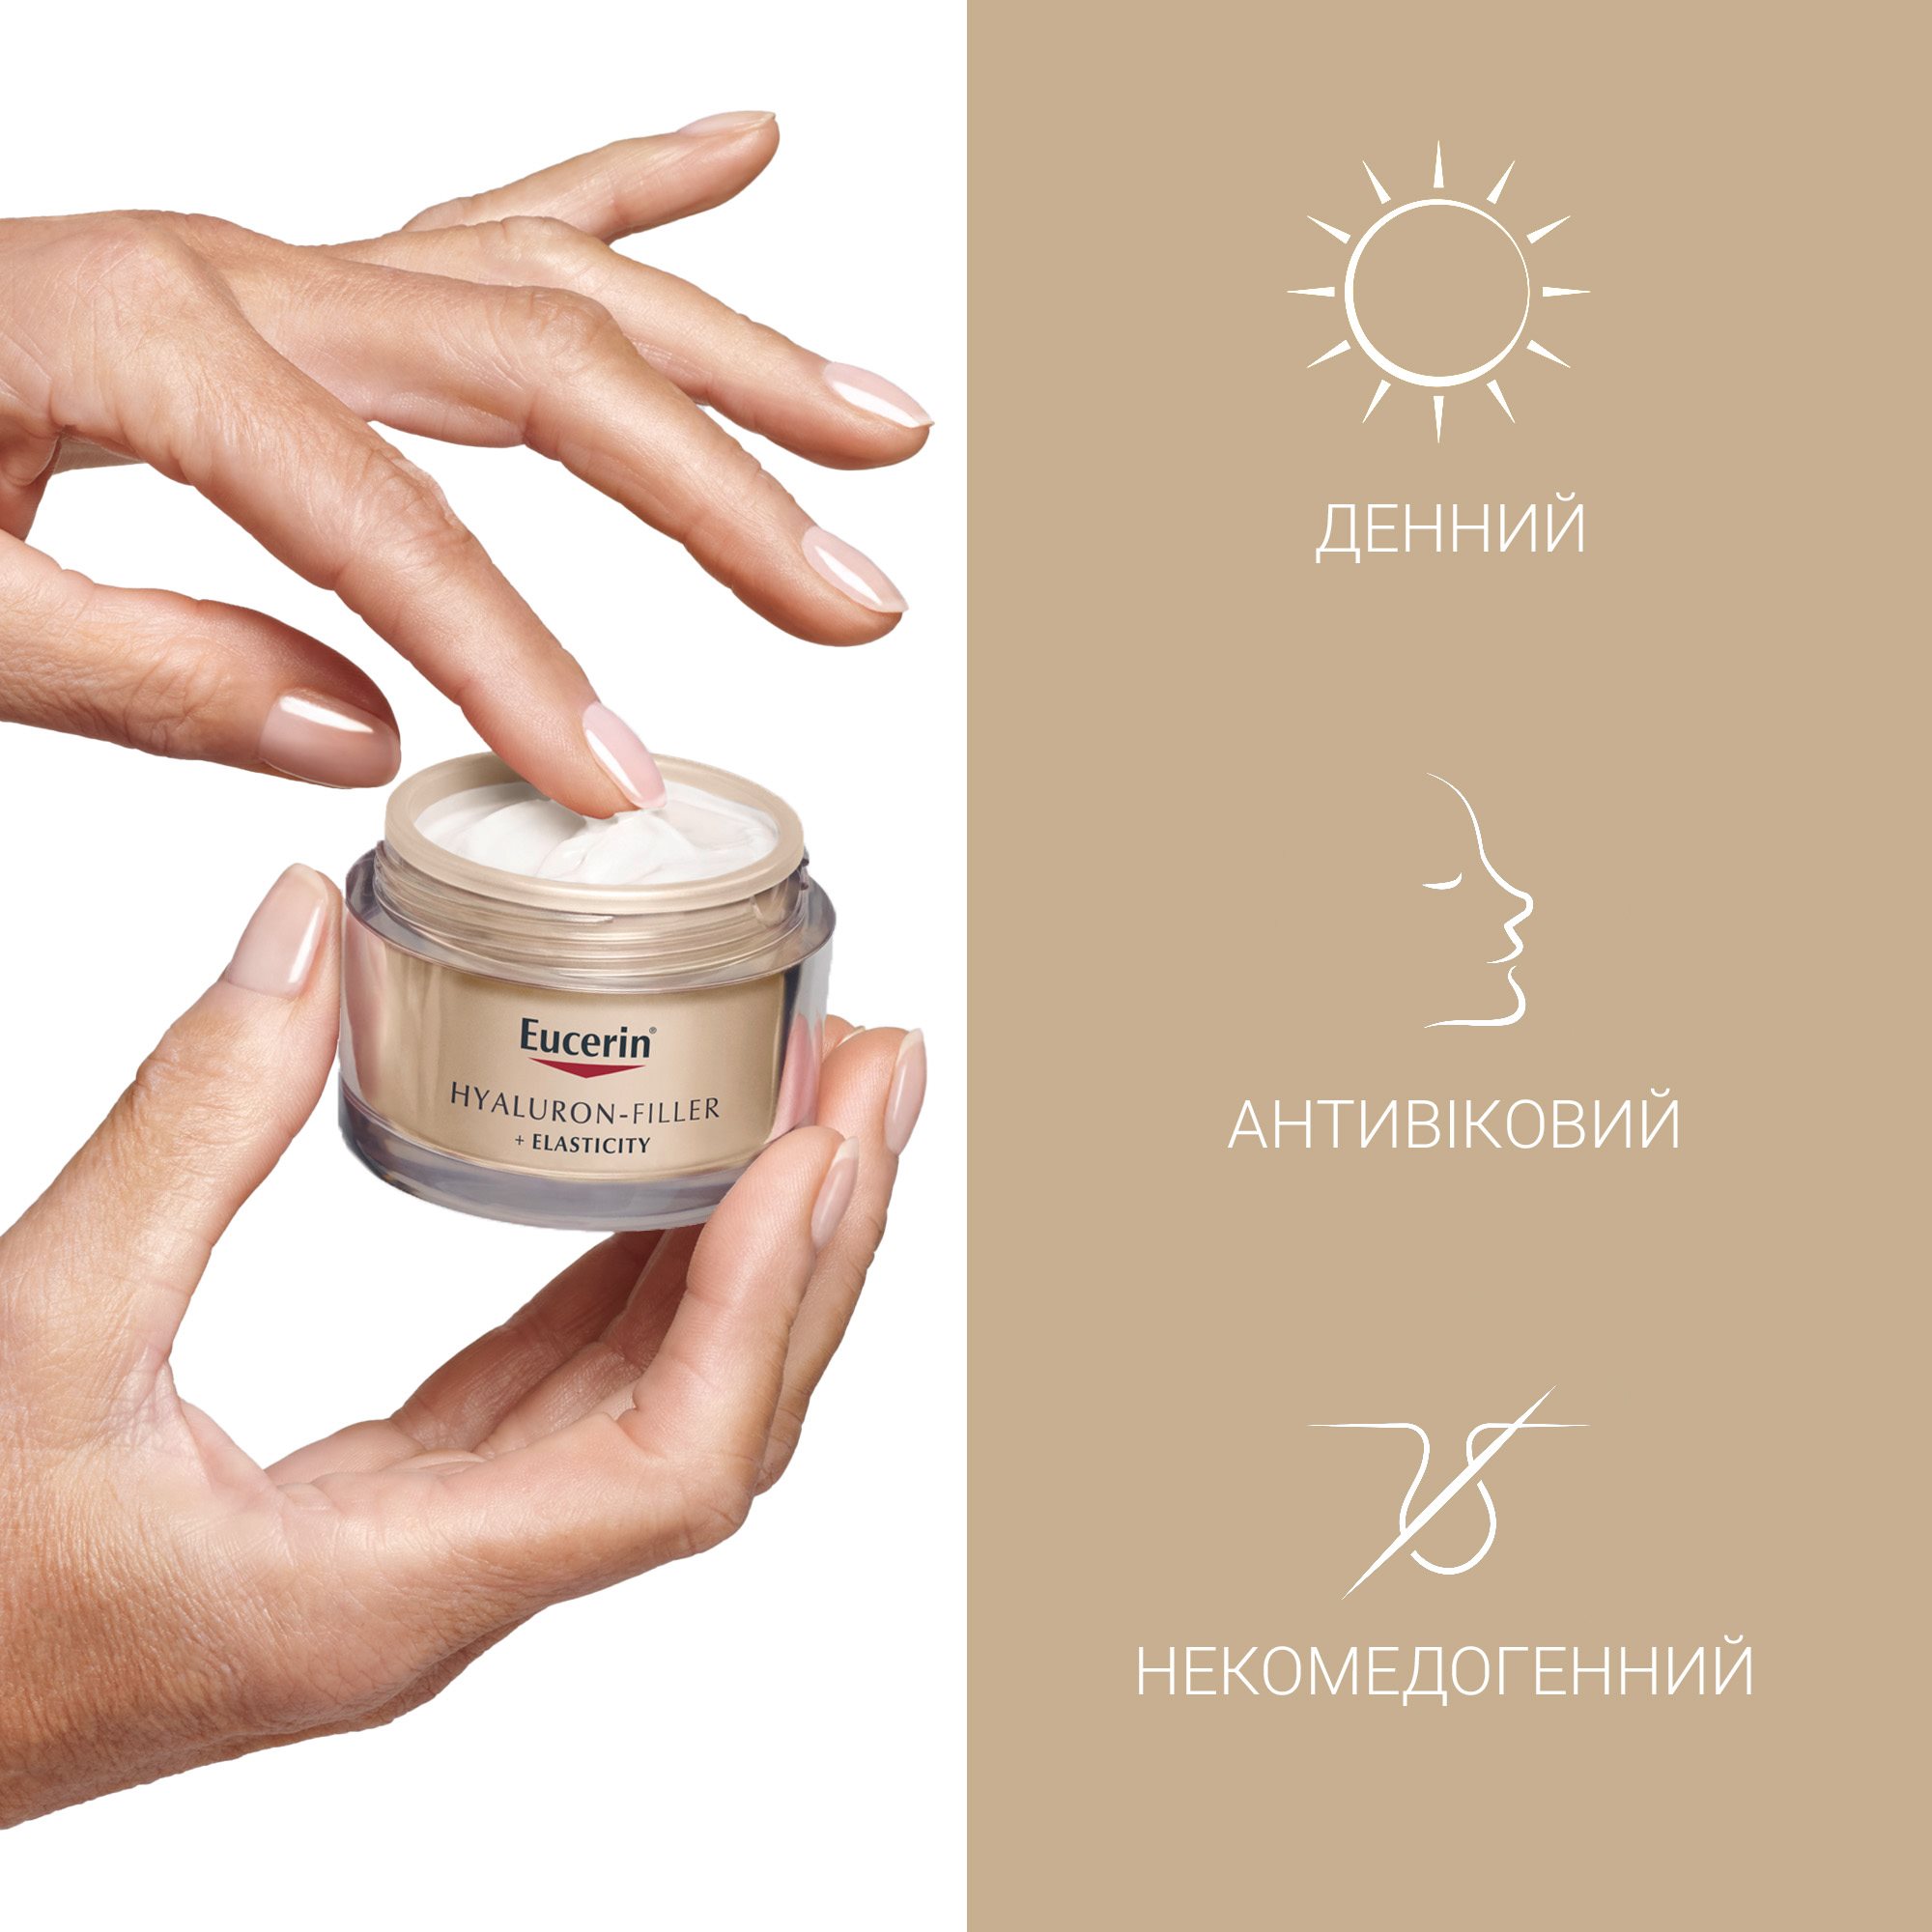 Eucerin Hyaluron-Filler + Elasticity Day Cream SPF15 with patented Thiamidol 